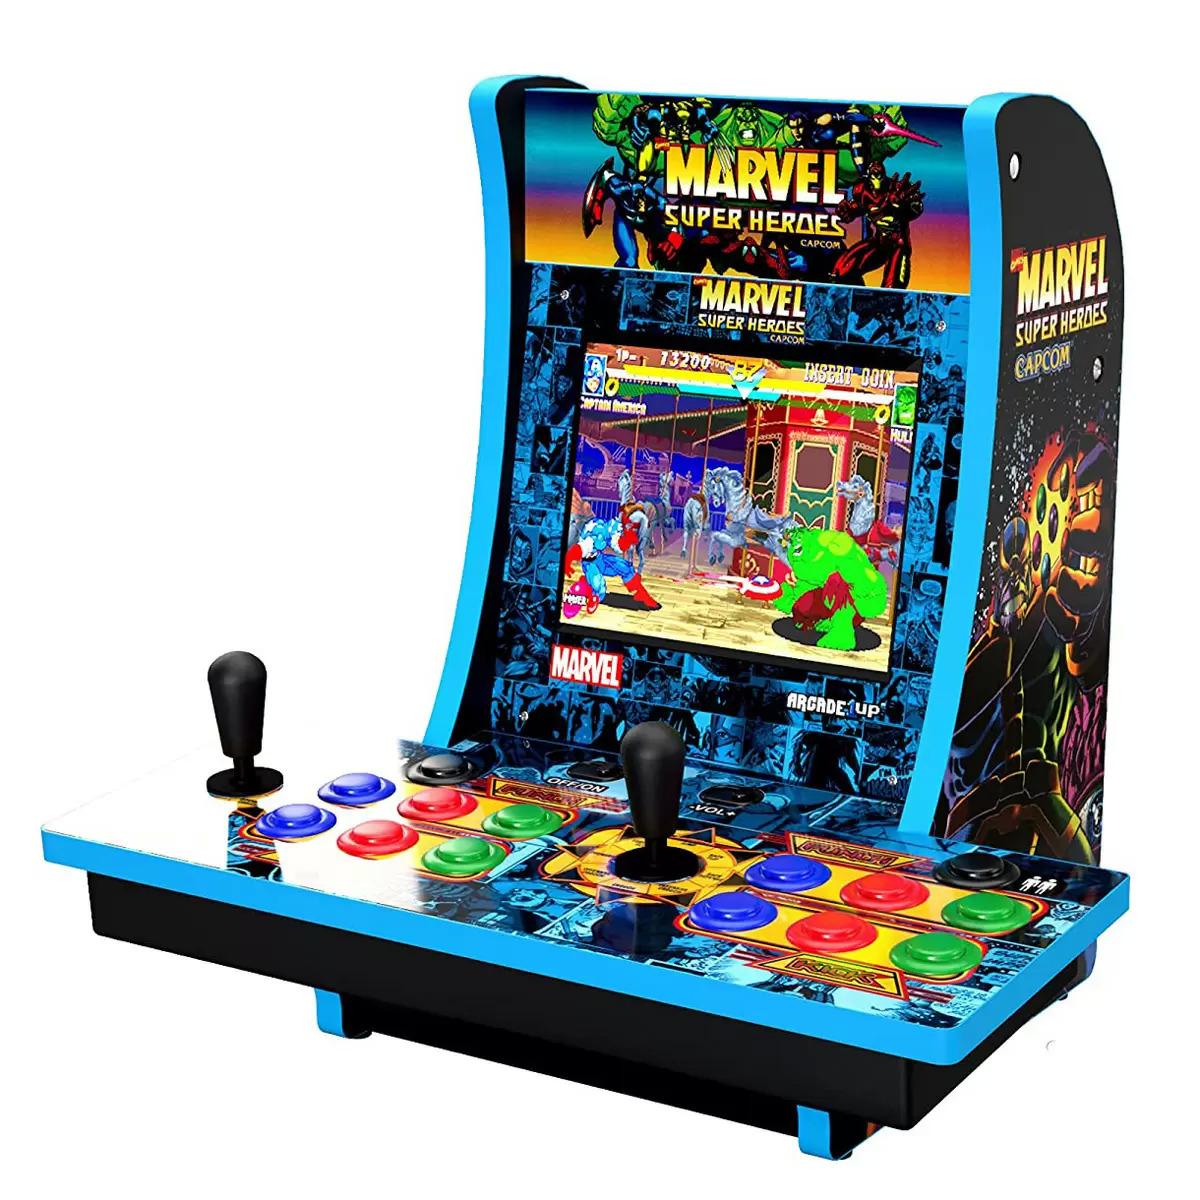 Arcade1Up Marvel Superheroes Countercade with $20 Kohls Cash for $129.99 Shipped